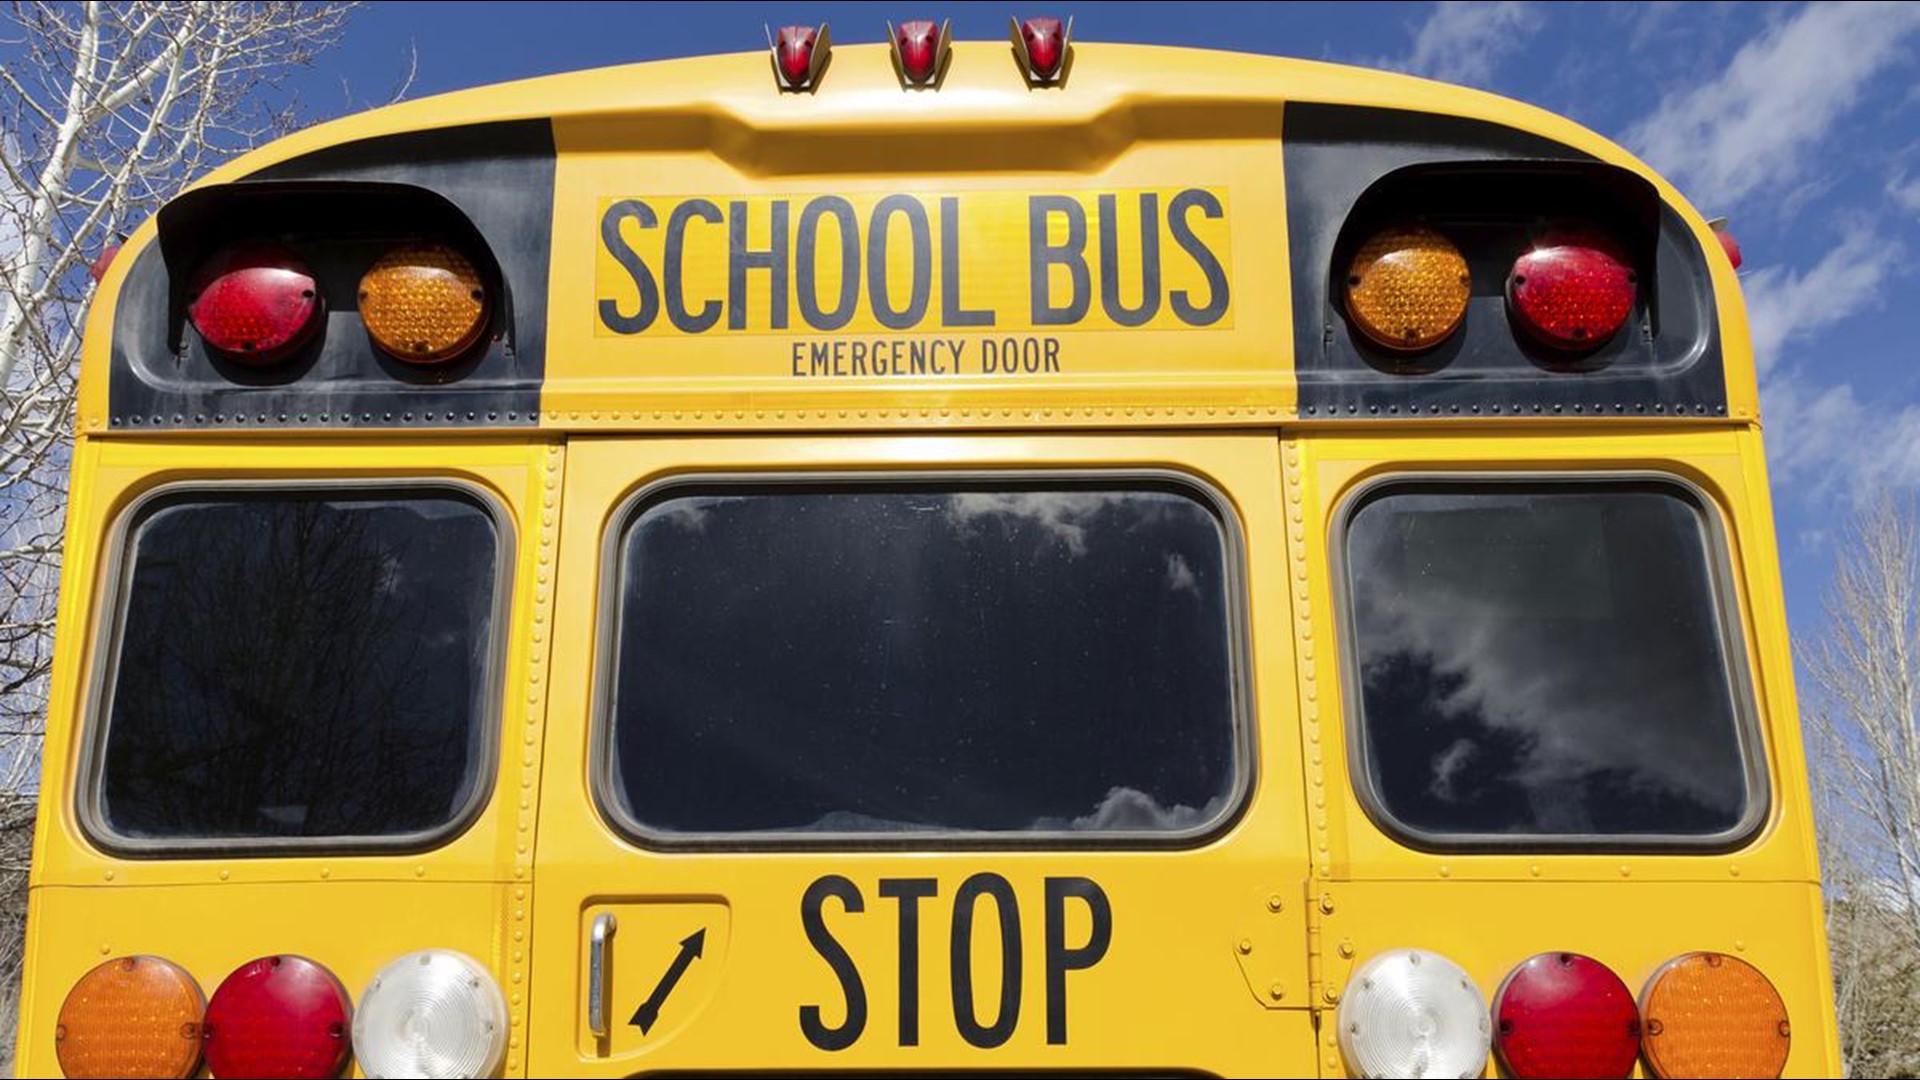 As the new school year begins, Killeen ISD is working make the roads safe for students by educating community members on school bus safety.